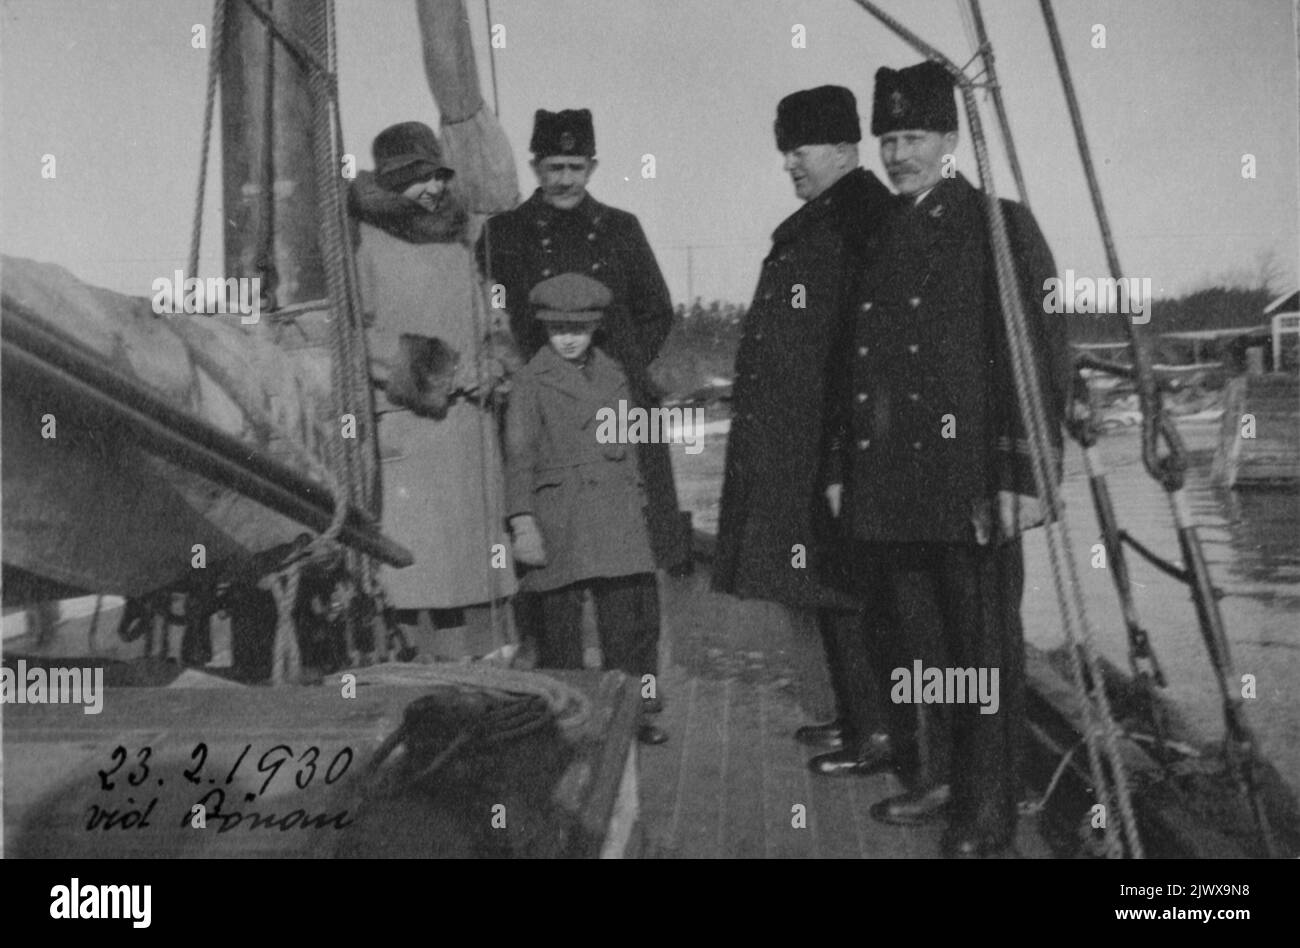 Ship pictures, the pilot Helmer Alm's album. Photo on February 23, 1930 at Bönan. Fartygsbilder, lotsen Helmer Alms album. Foto den 23 februari 1930 vid Bönan. Stock Photo